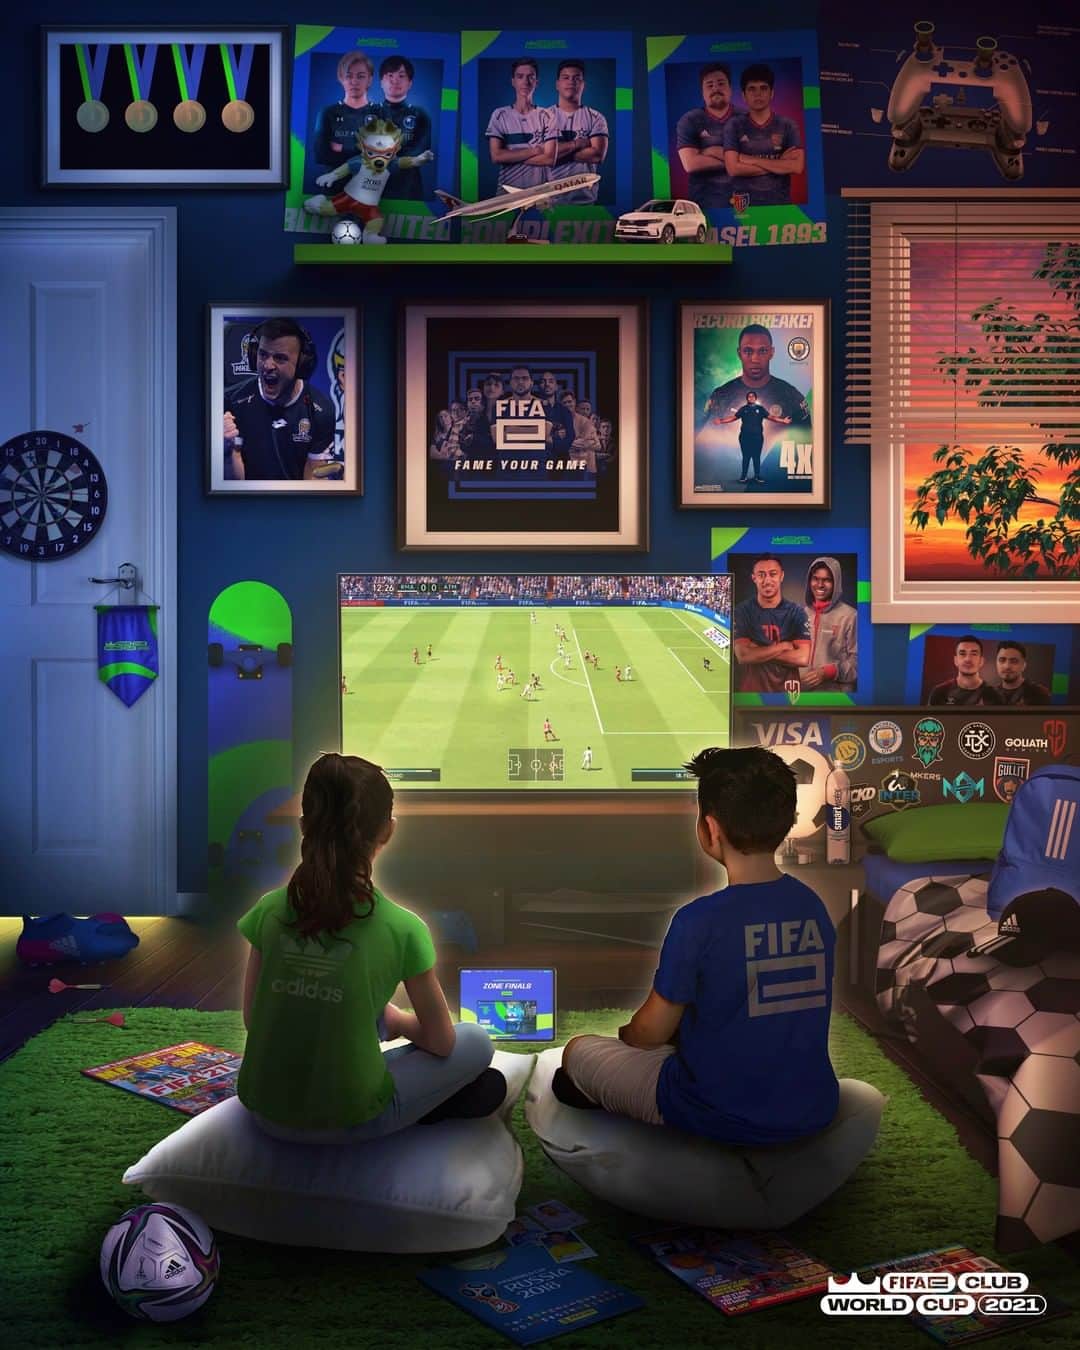 FIFAワールドカップのインスタグラム：「Us this weekend: watching, learning and trying to emulate the best 🔥🎮  Follow the world's top clubs in #FIFA21 battle it out at the @FIFAe Club World Cup 2021 this weekend.」